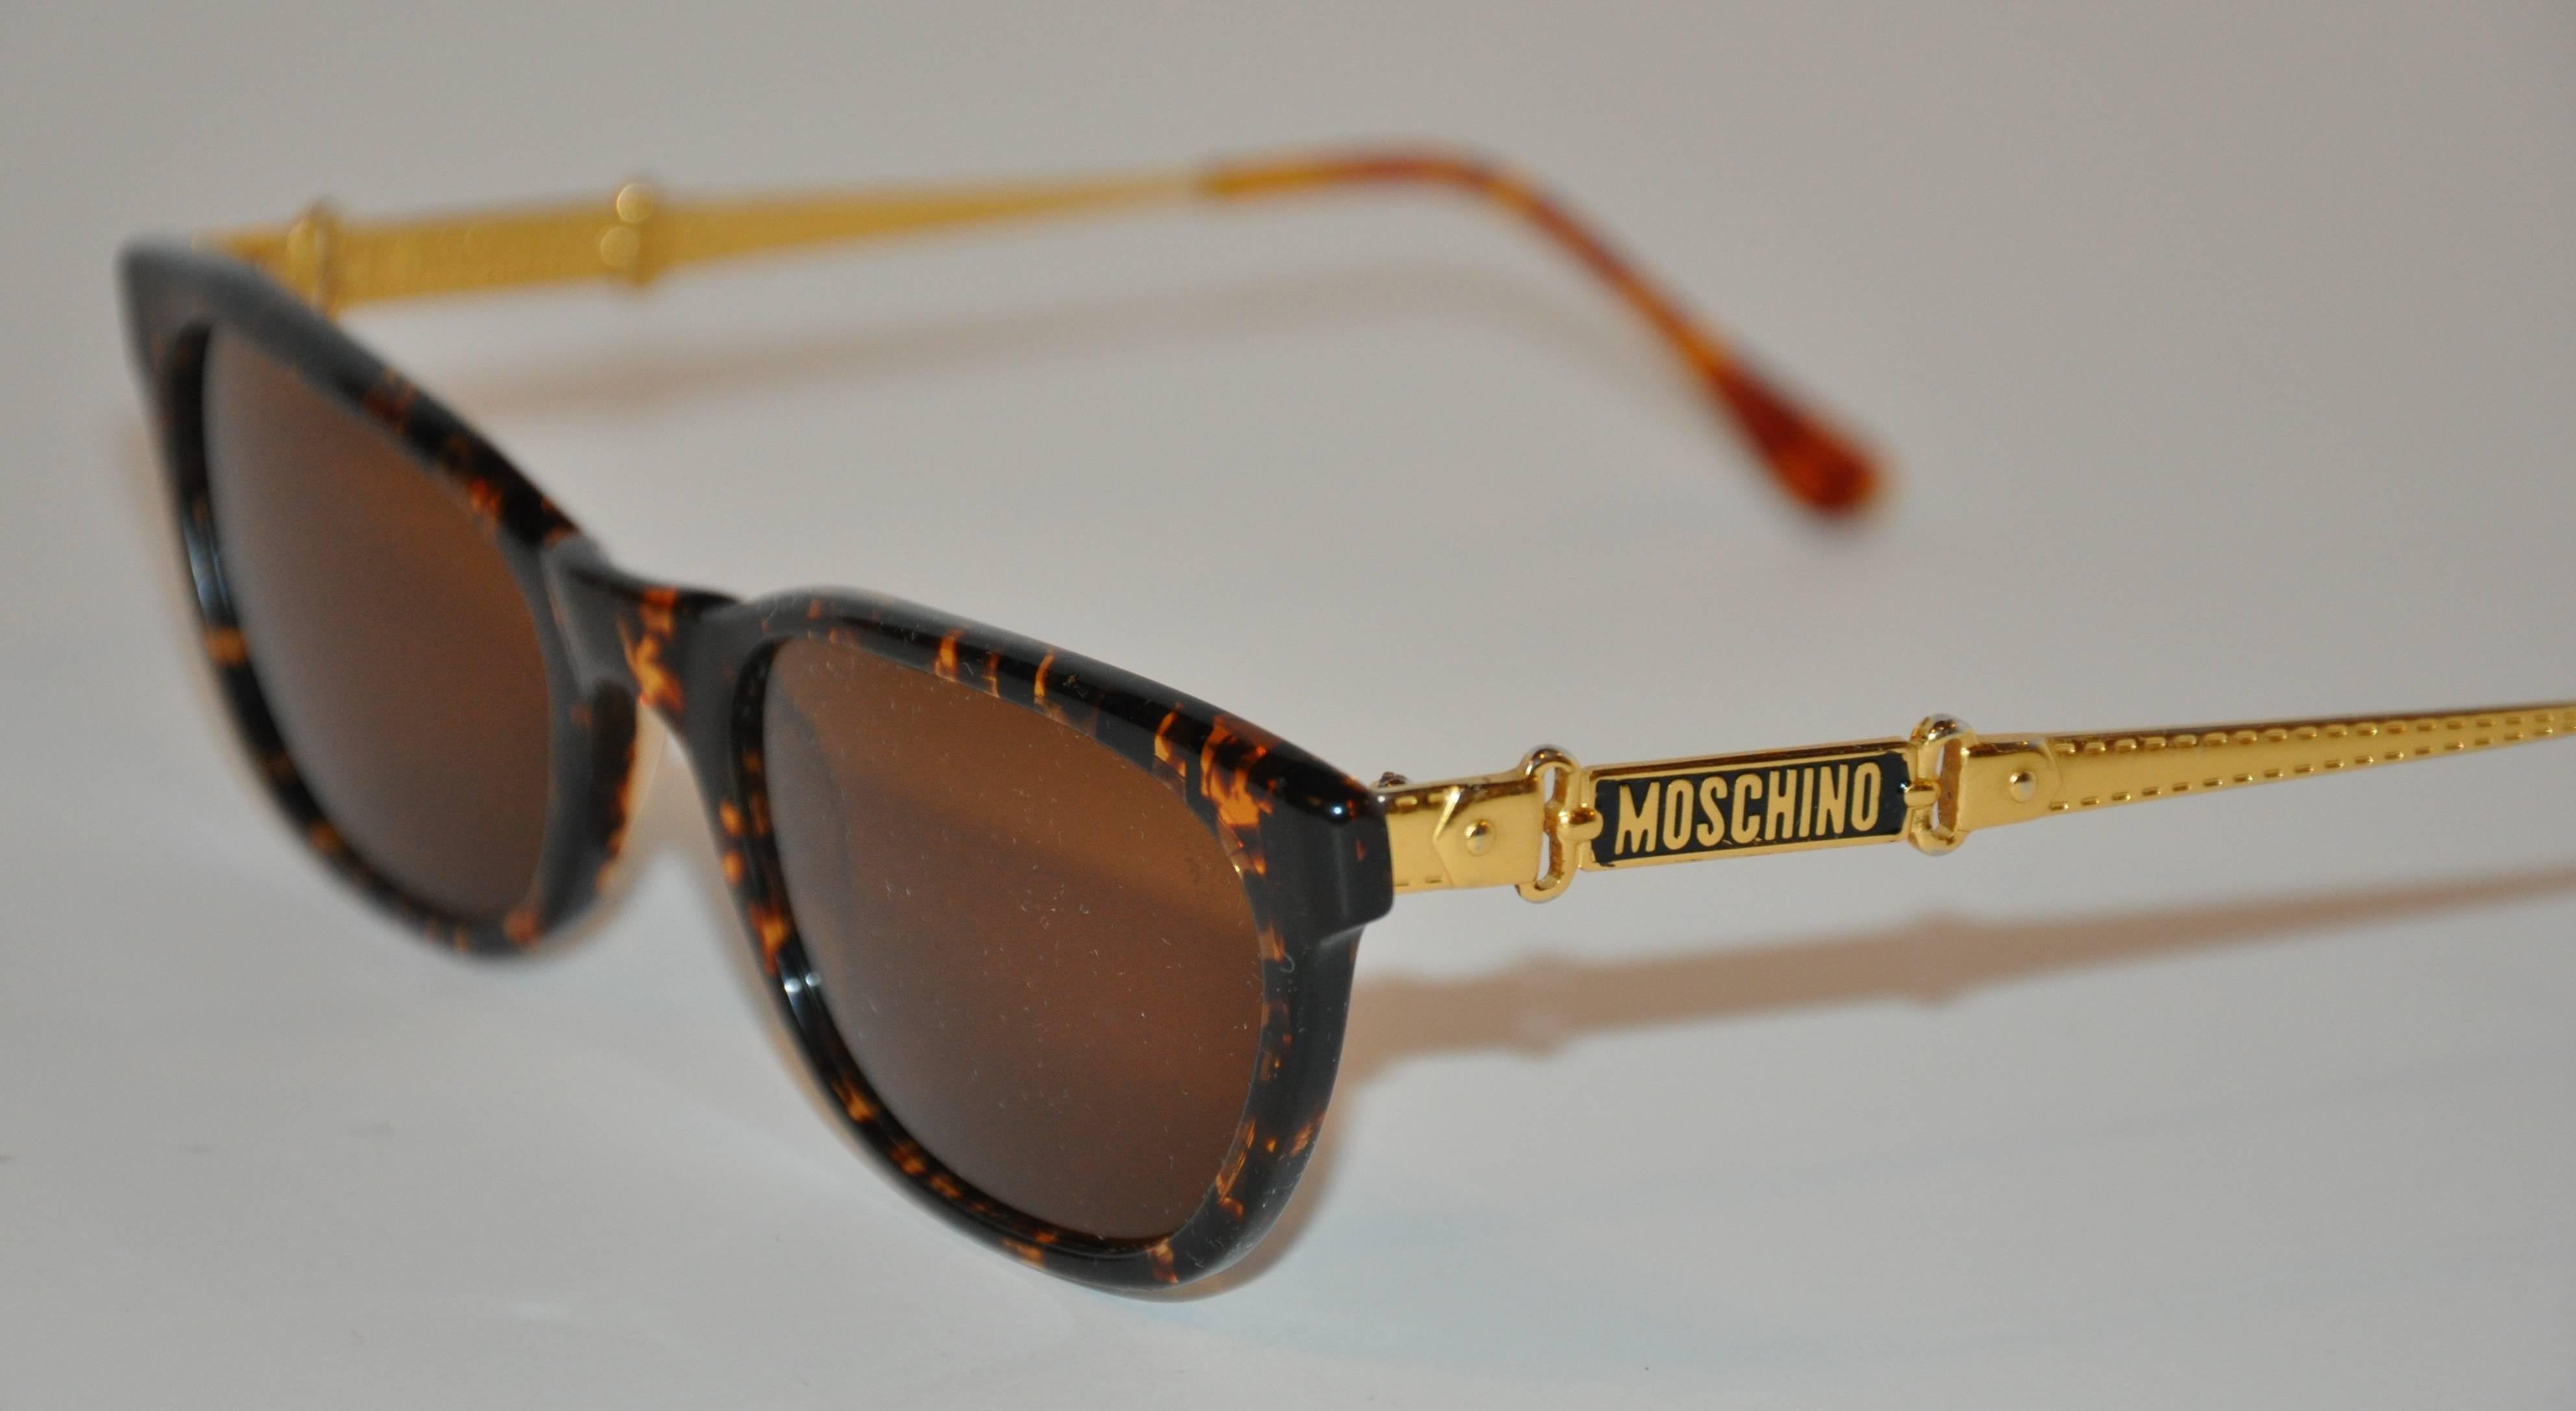 Moschino wonderfully detailed tortoise shell sunglass are engraved with the signature name-plate on both the exterior as well as the interior of both arms. The arms are also detailed with gold-tone engraved buckle and belt accents. The front